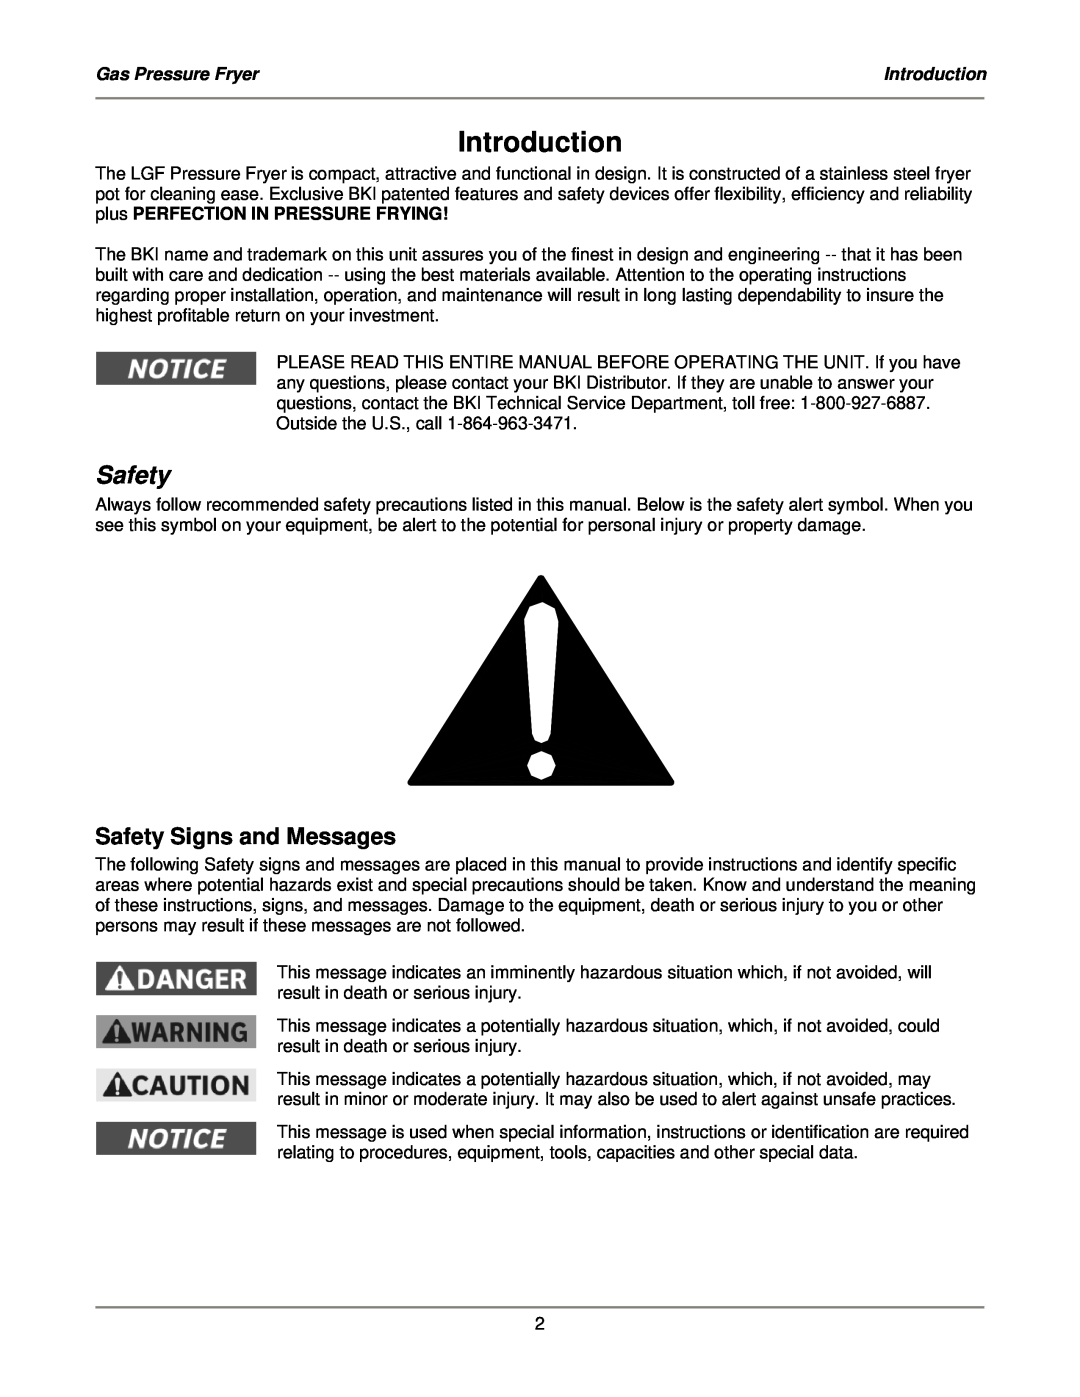 Bakers Pride Oven LGF-FC service manual Introduction, Safety Signs and Messages 